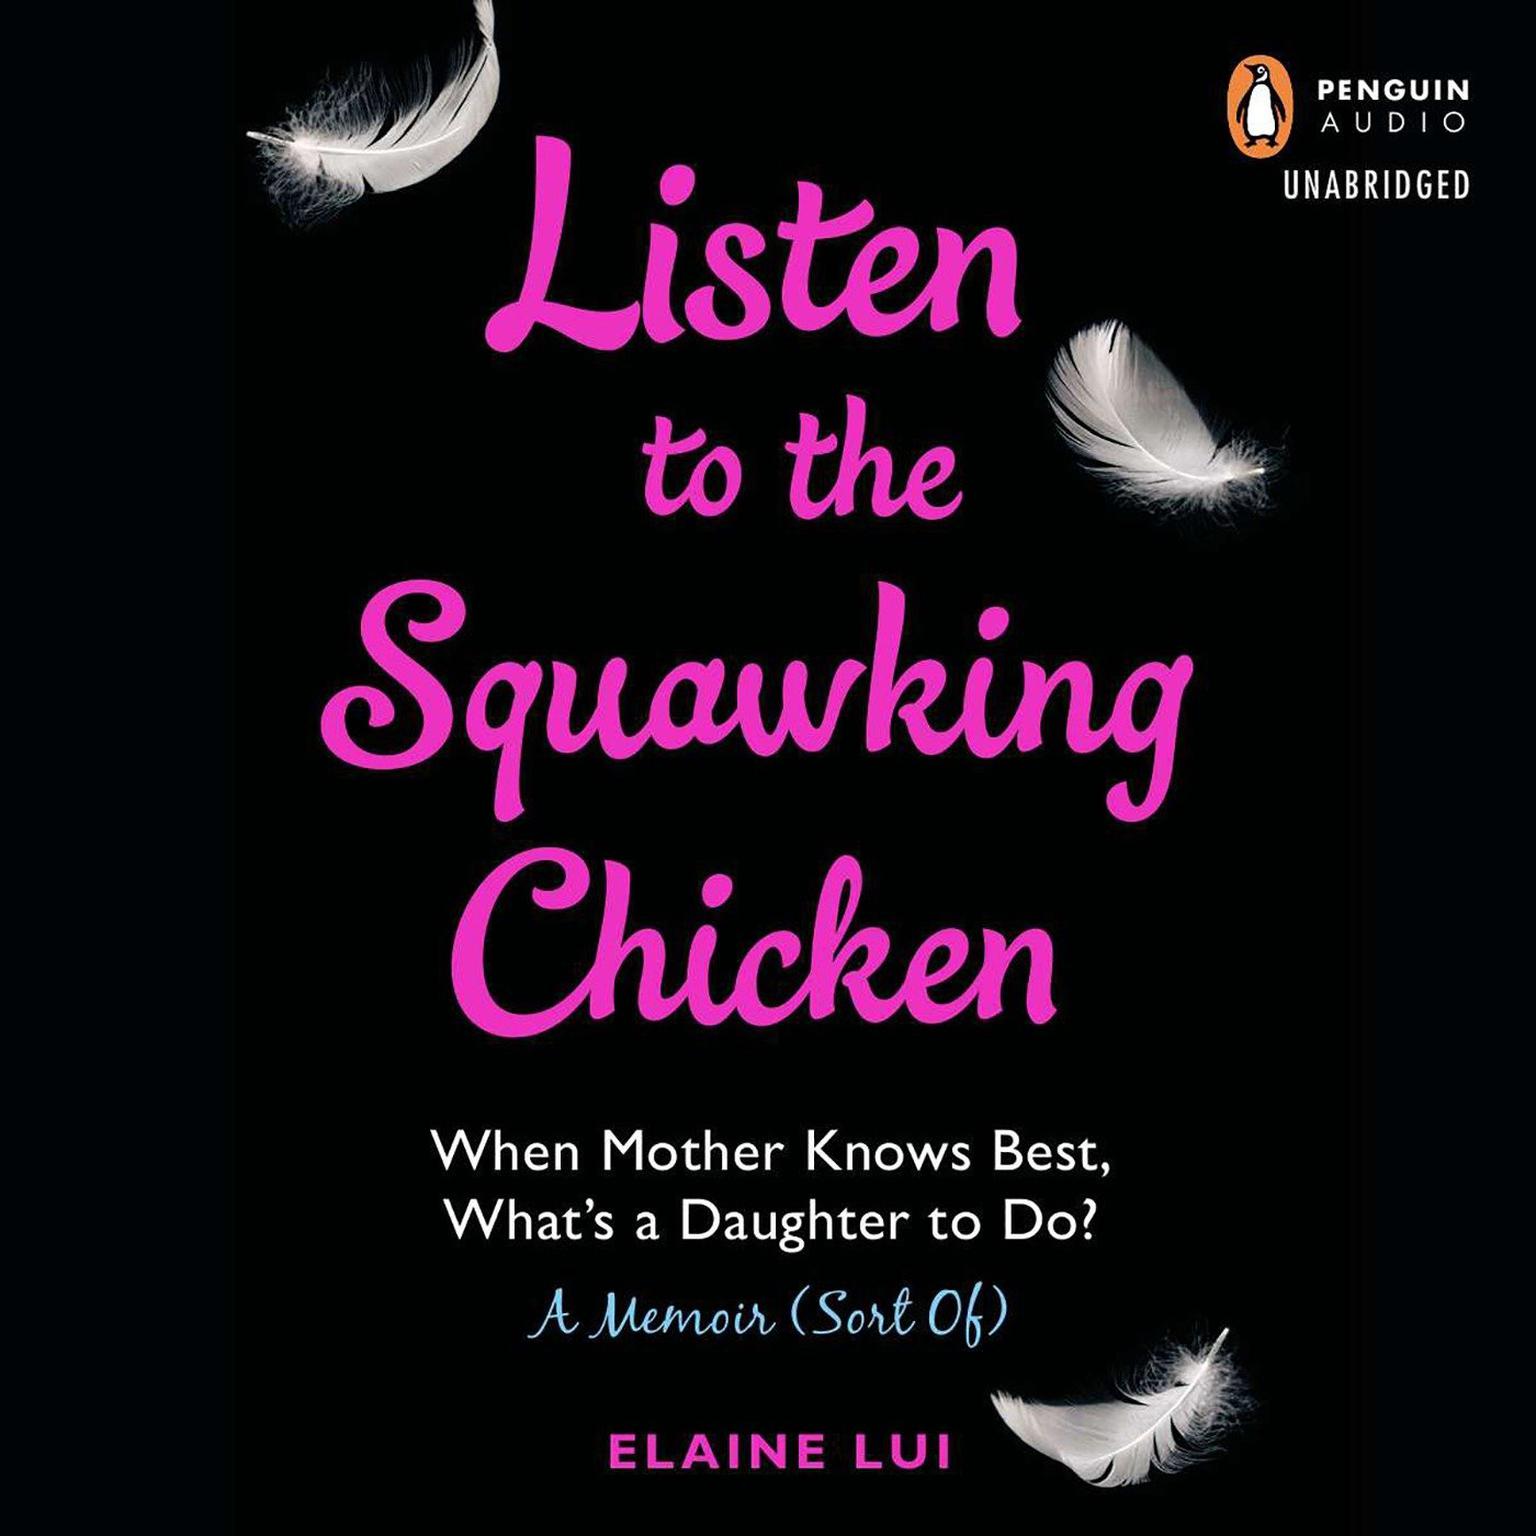 Listen to the Squawking Chicken: When Mother Knows Best, Whats a Daughter To Do? A Memoir (Sort Of) Audiobook, by Elaine Lui